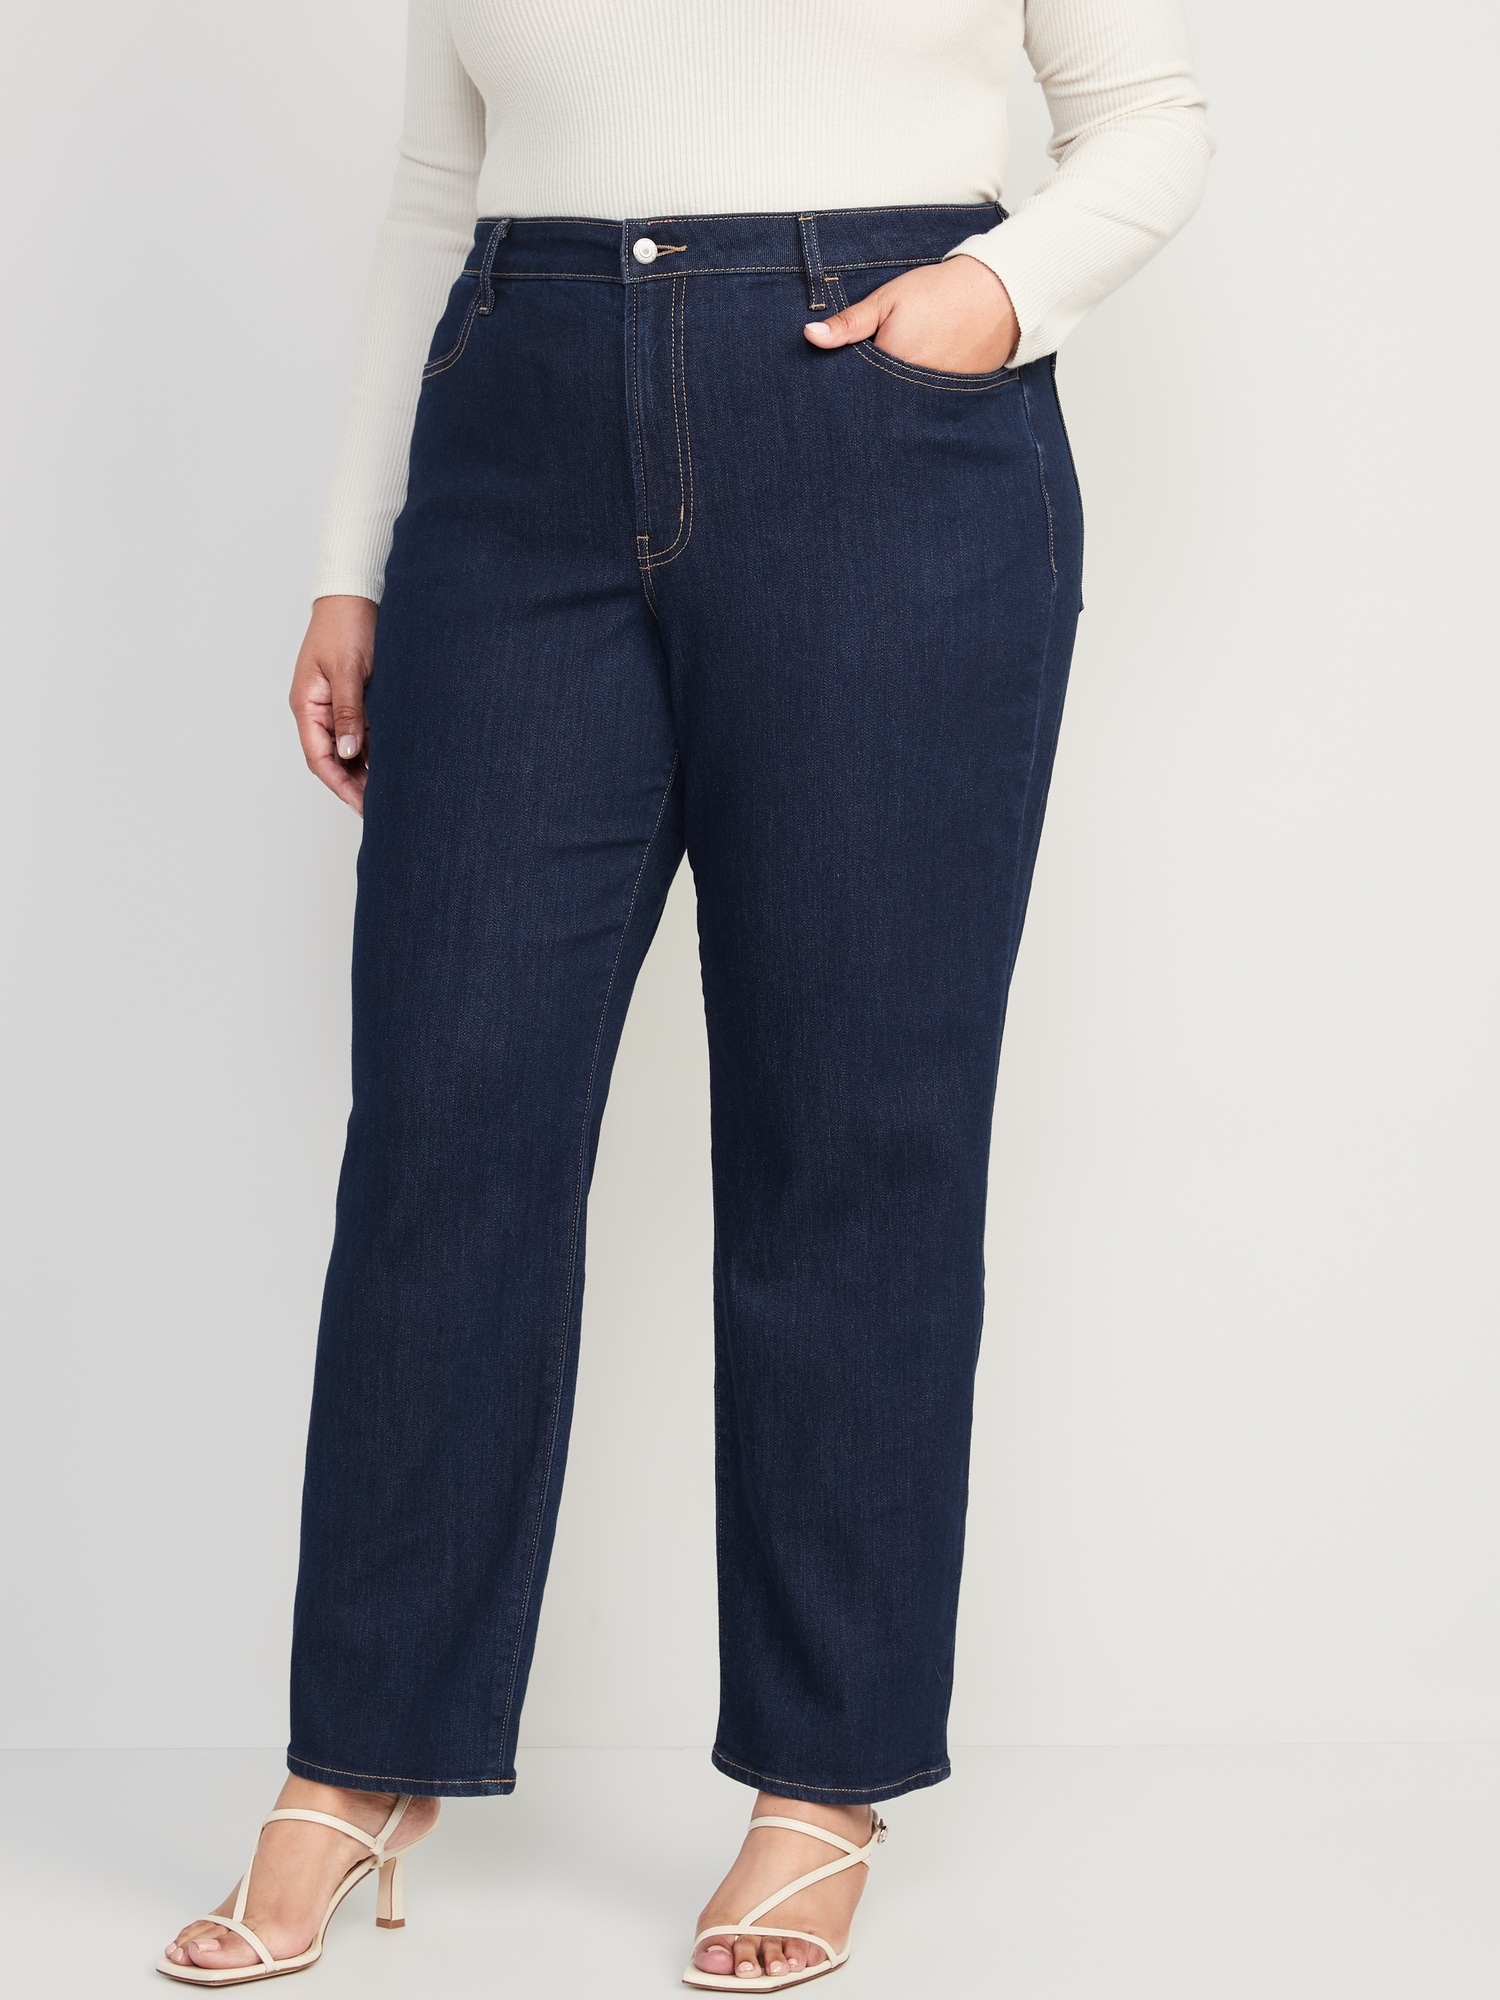 Wow High-Waisted Loose Jeans for Women | Old Navy